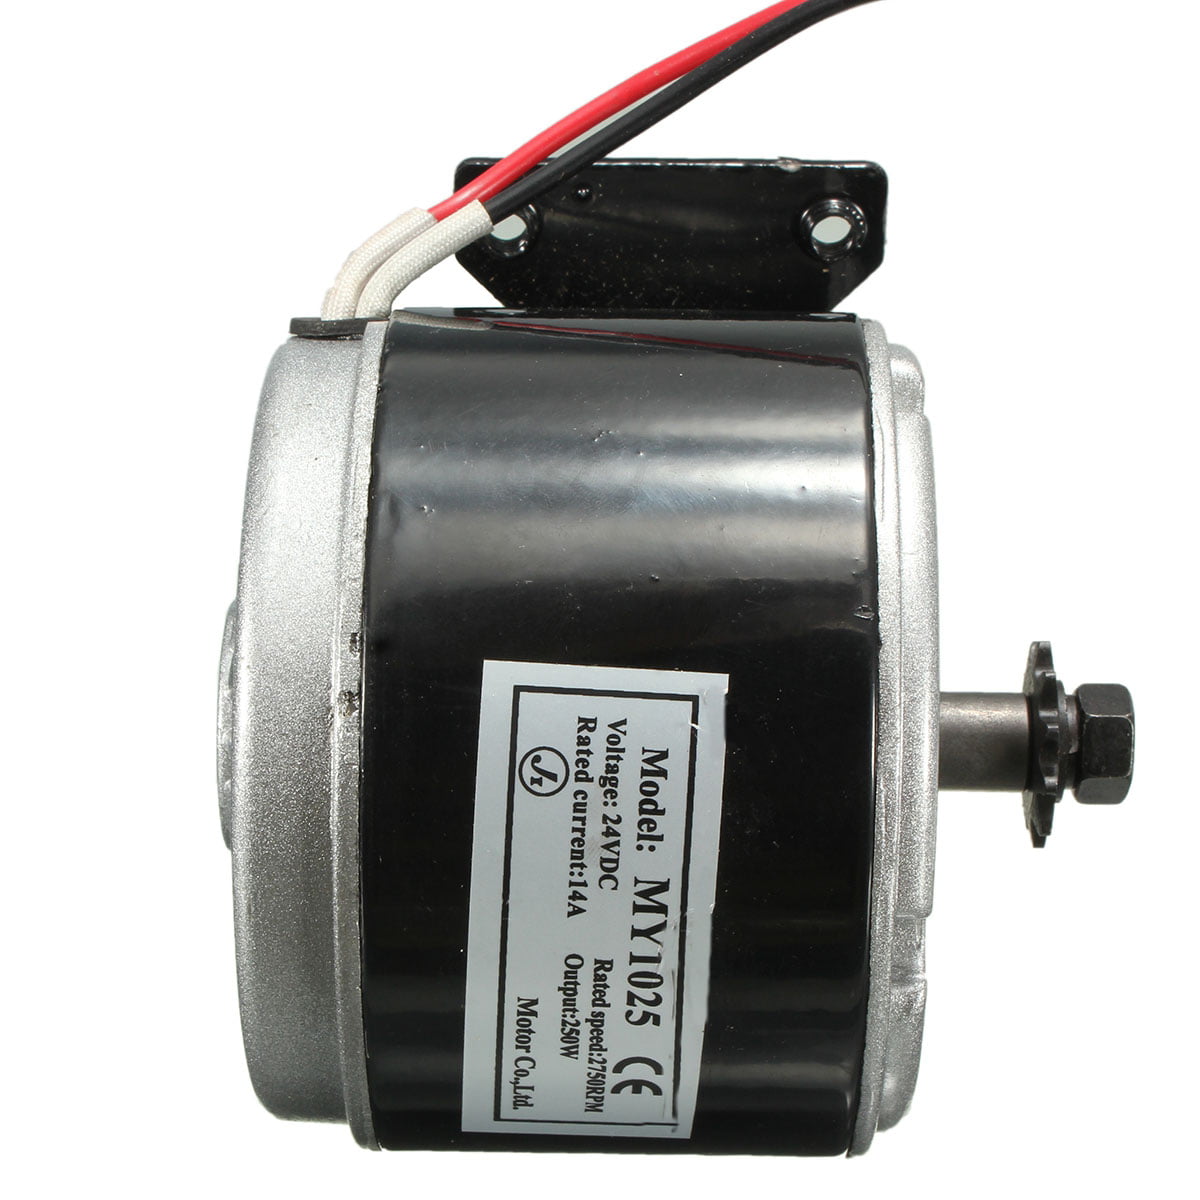 24V Electric Motor Brushed 250W 2750RPM Chain E Bike Scooter Drive MY1025 AT 